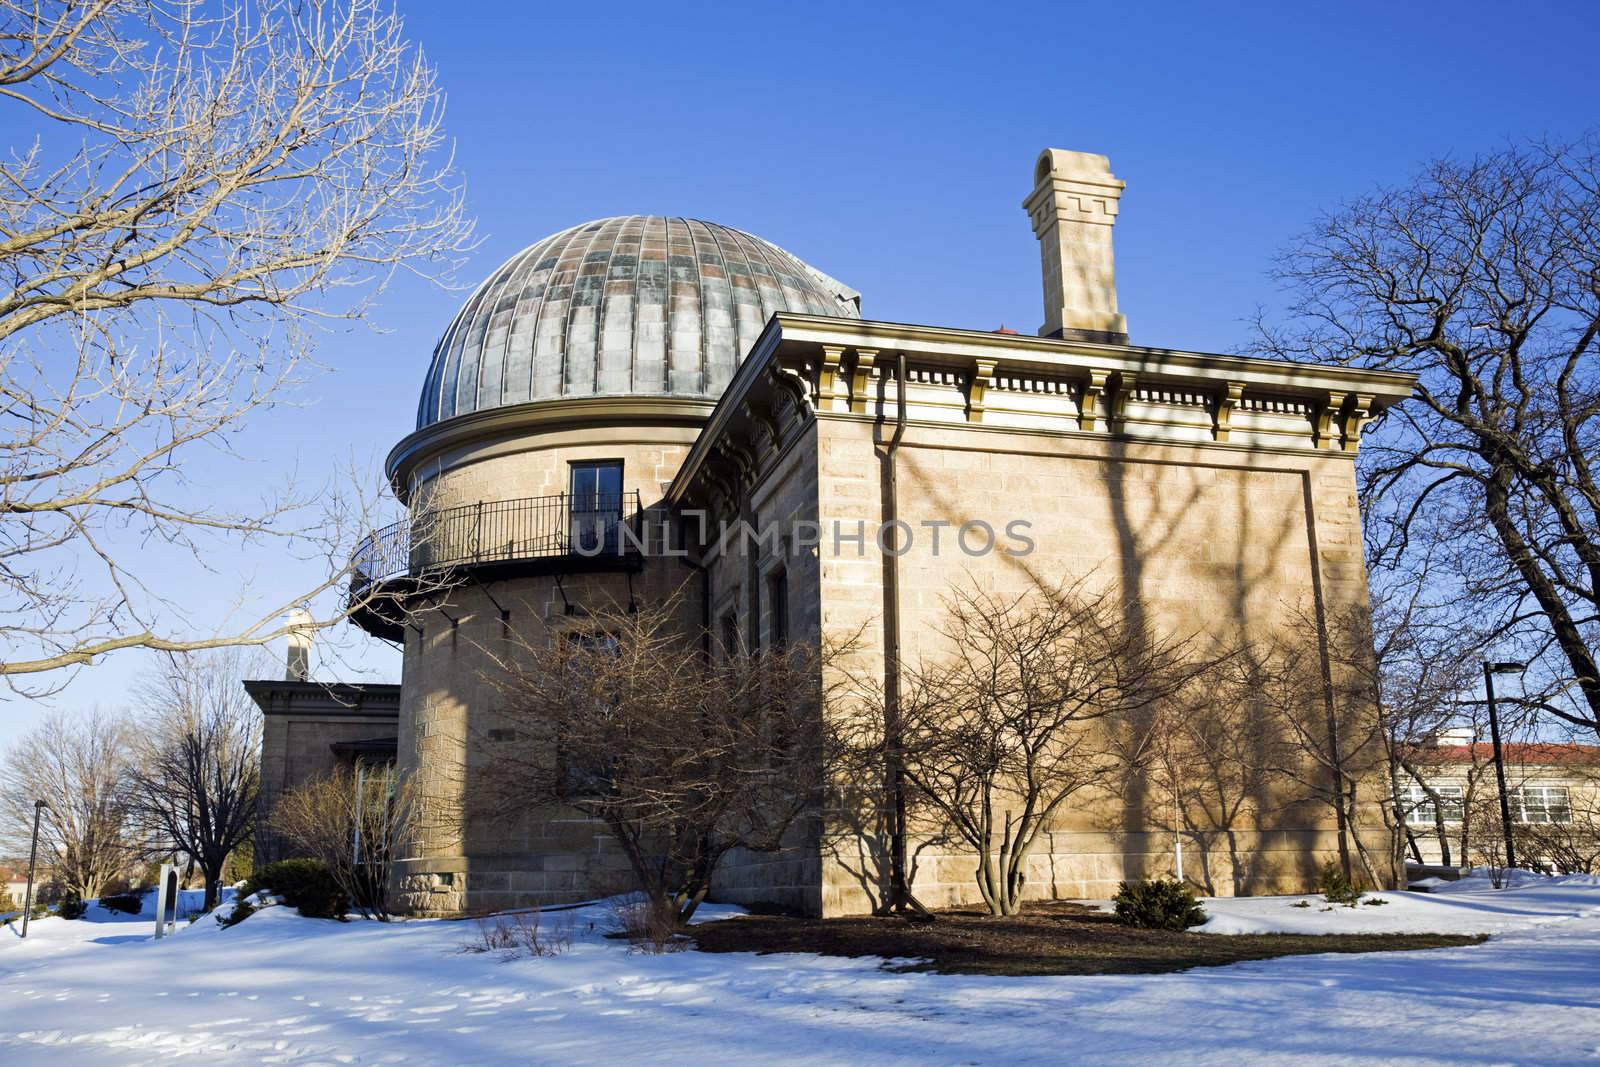 Observatory in Madison, Wisconsin - winter time.